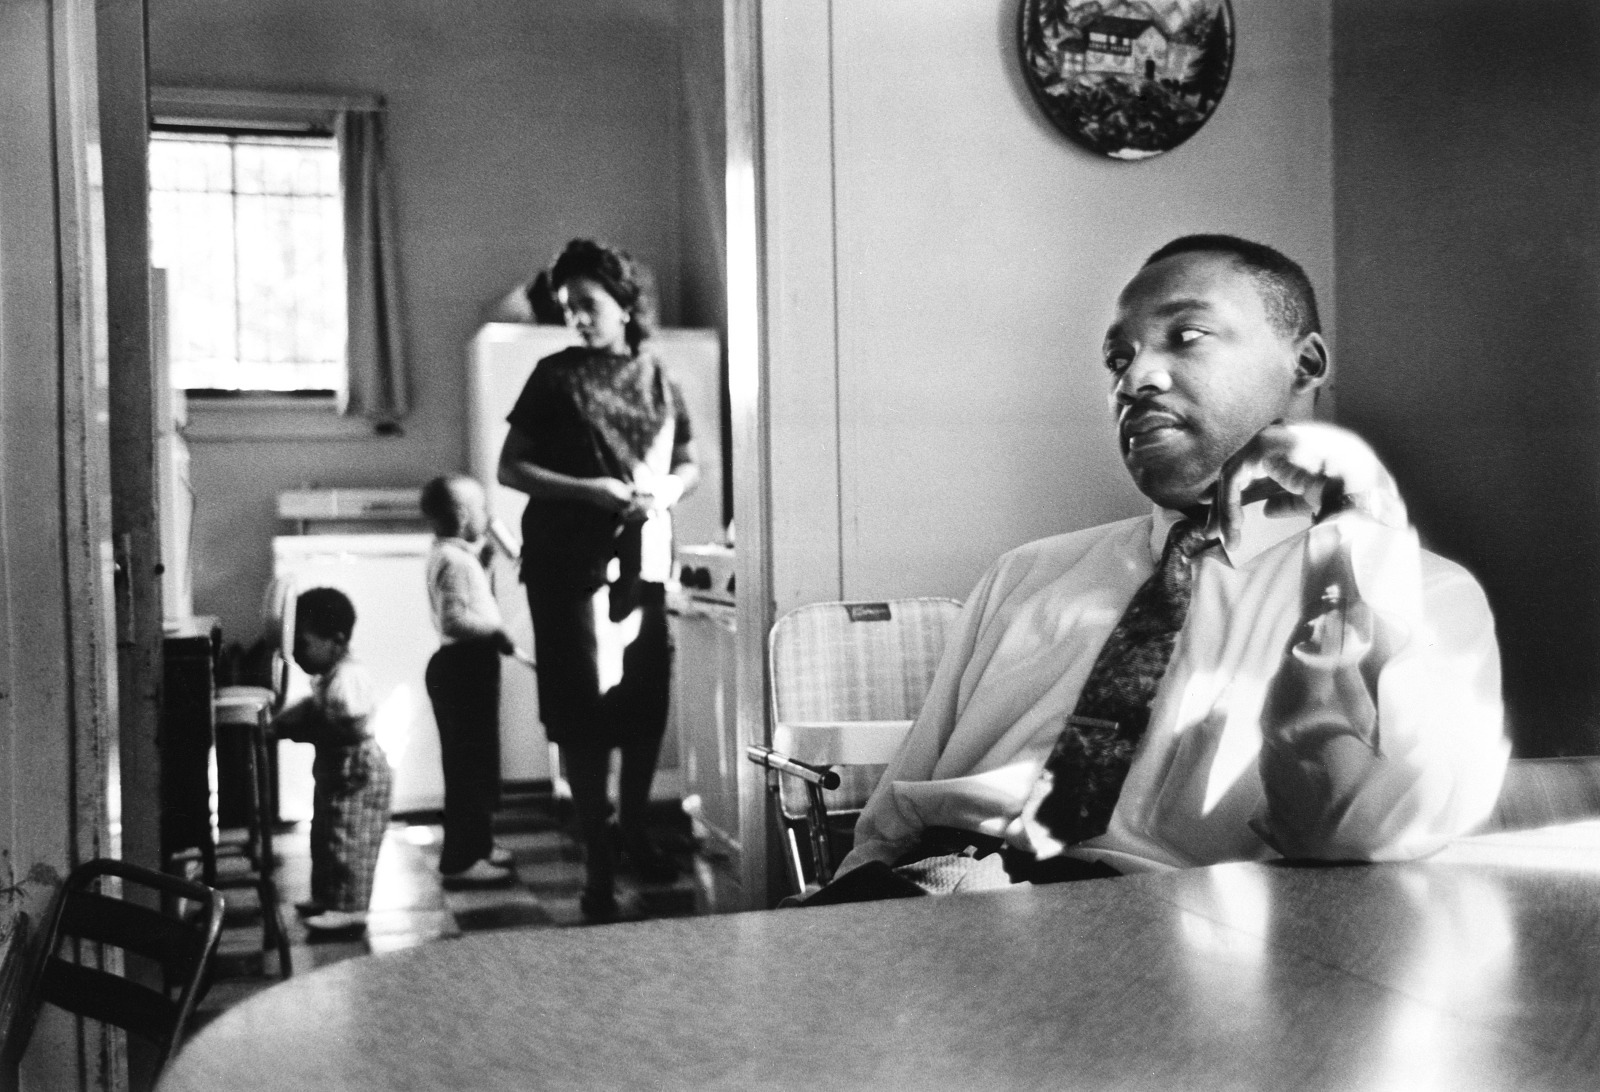 Black and white photograph of Dr. Martin Luther King, Jr., sitting at a table with his wife, Coretta Scott King, and two children in the background